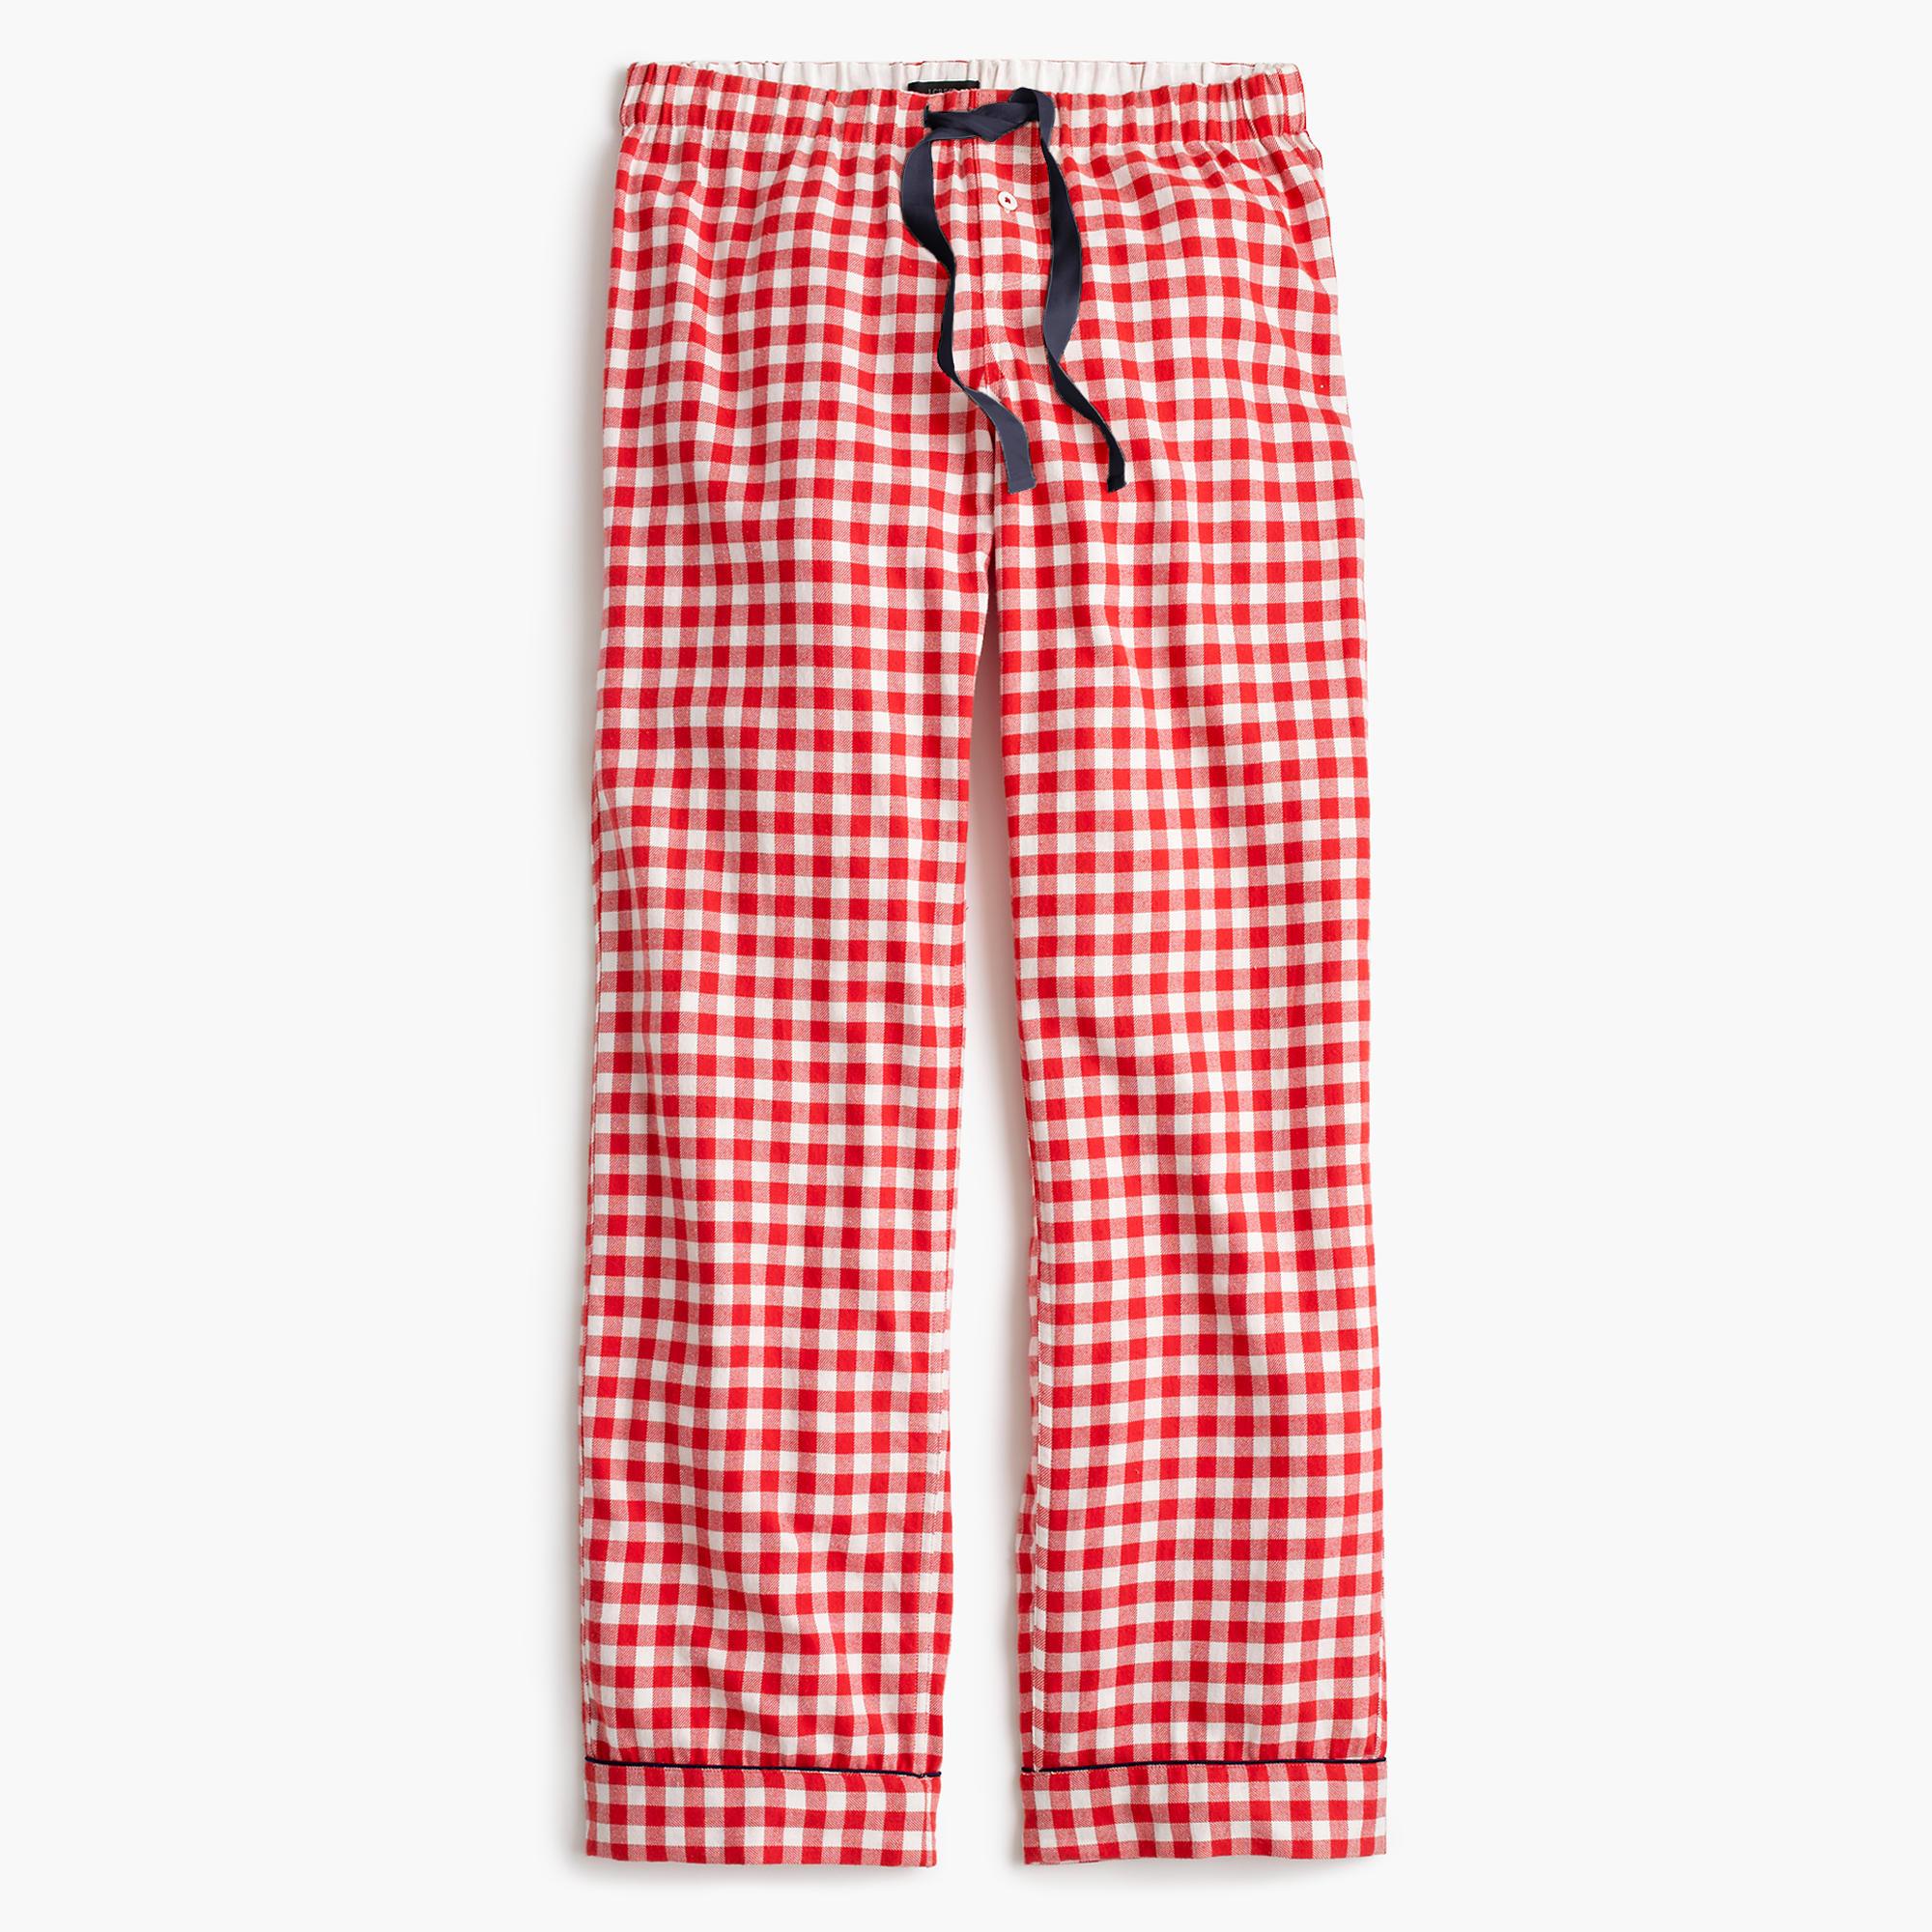 J.Crew Petite Gingham Flannel Pajama Pant in Red - Lyst